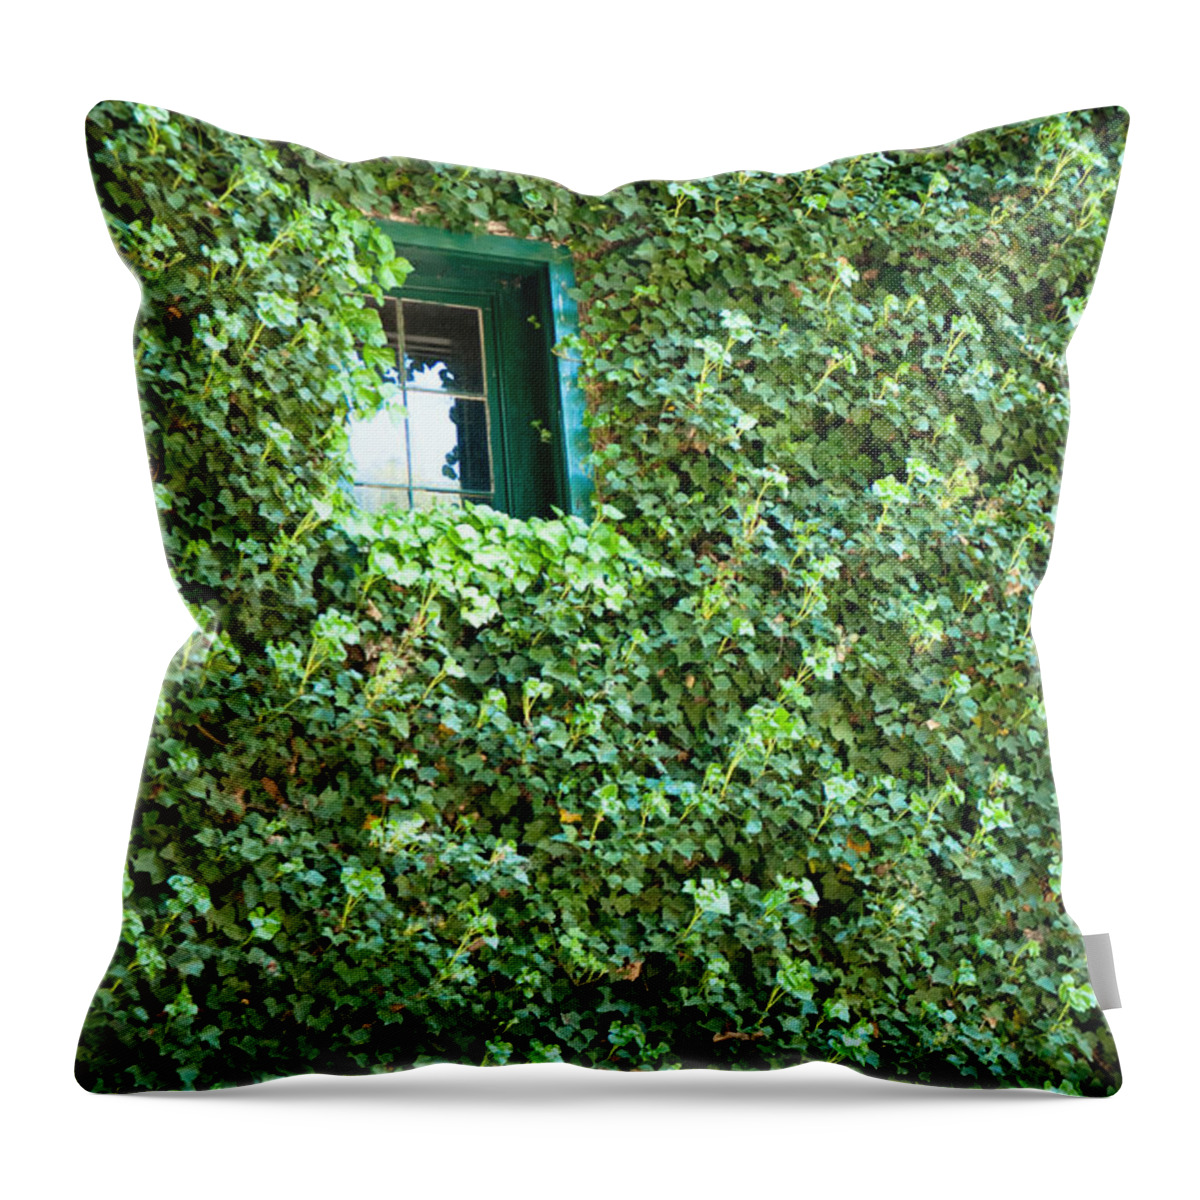 Napa Throw Pillow featuring the photograph Napa Wine Cellar Window by Shane Kelly